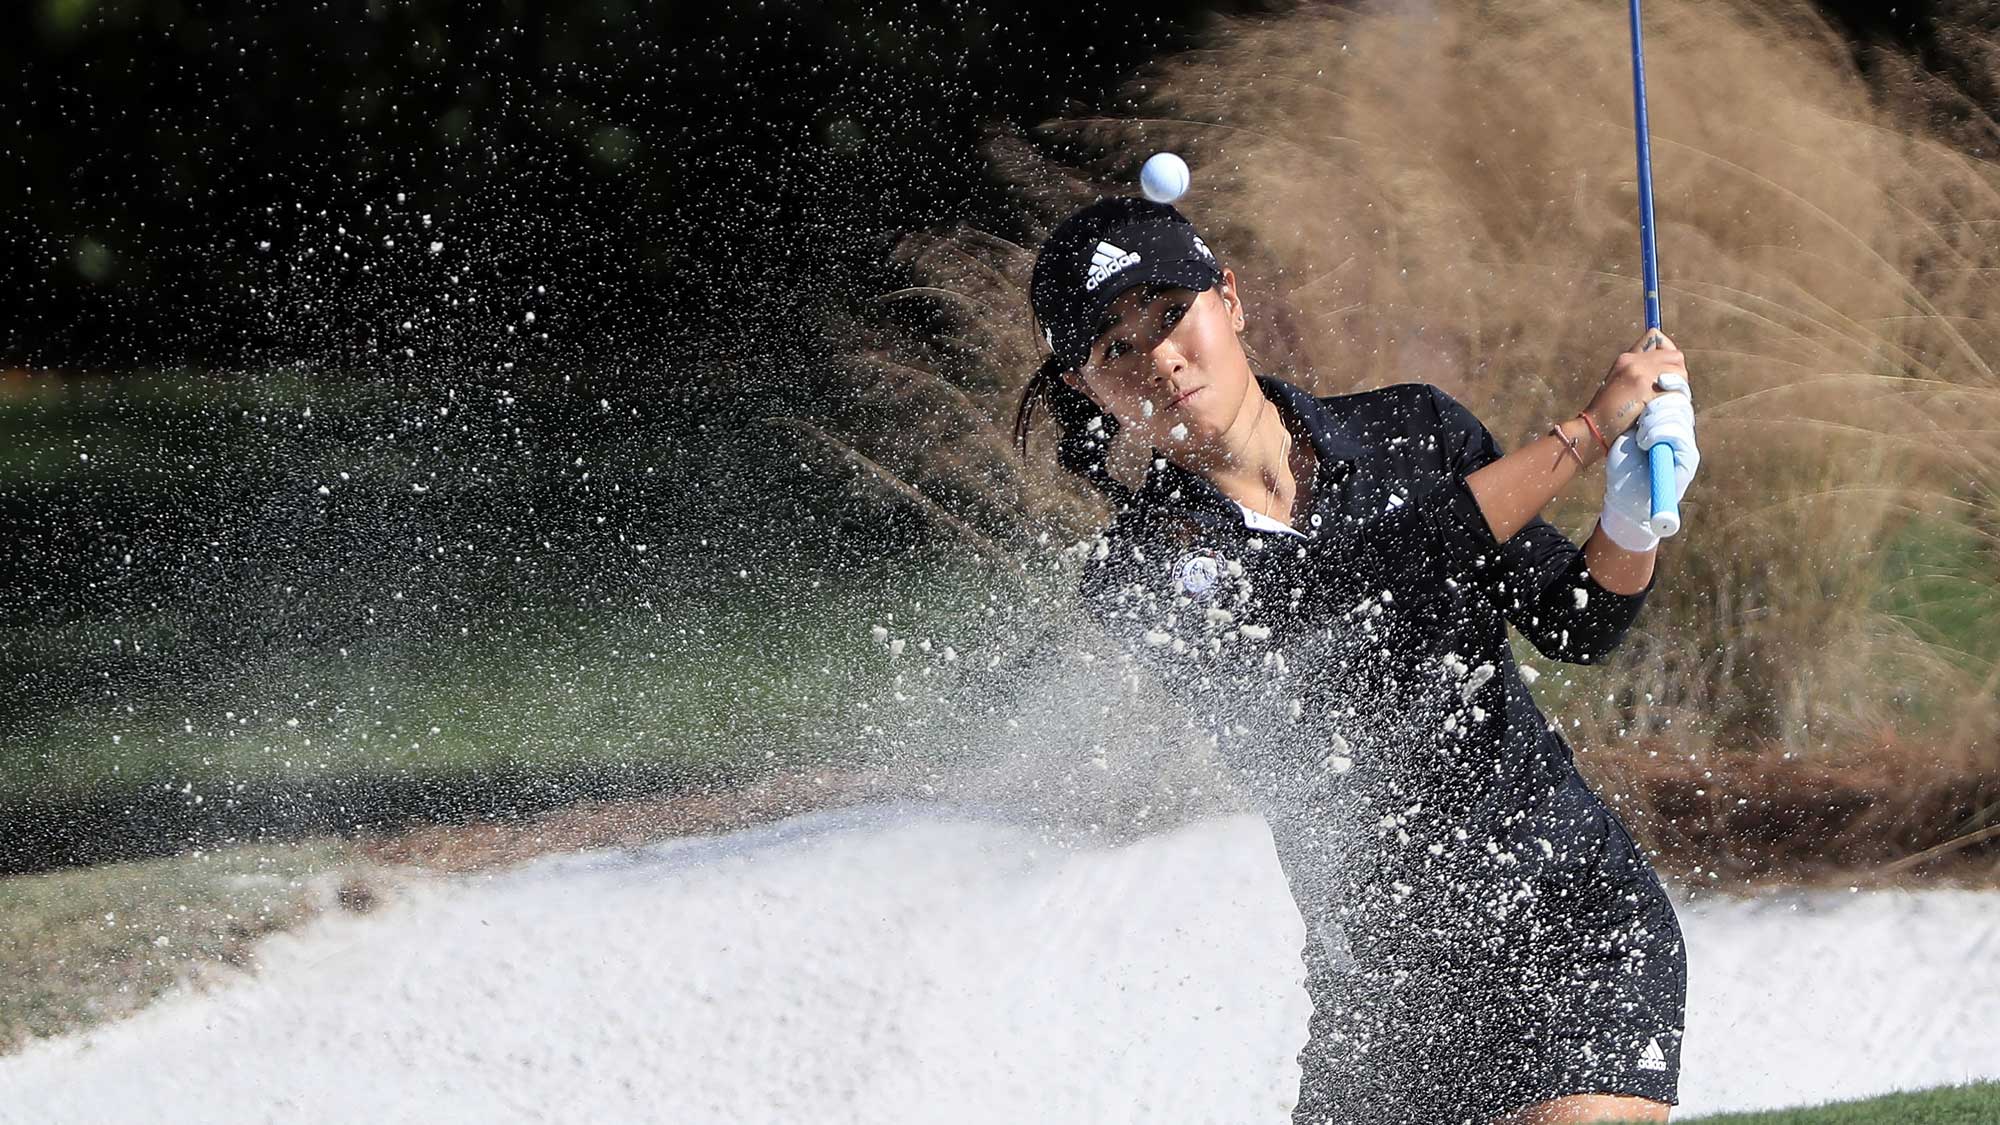 Danielle Kang plays her shot out of the bunker on the sixth hole during the second round of the CME Group Tour Championship at Tiburon Golf Club